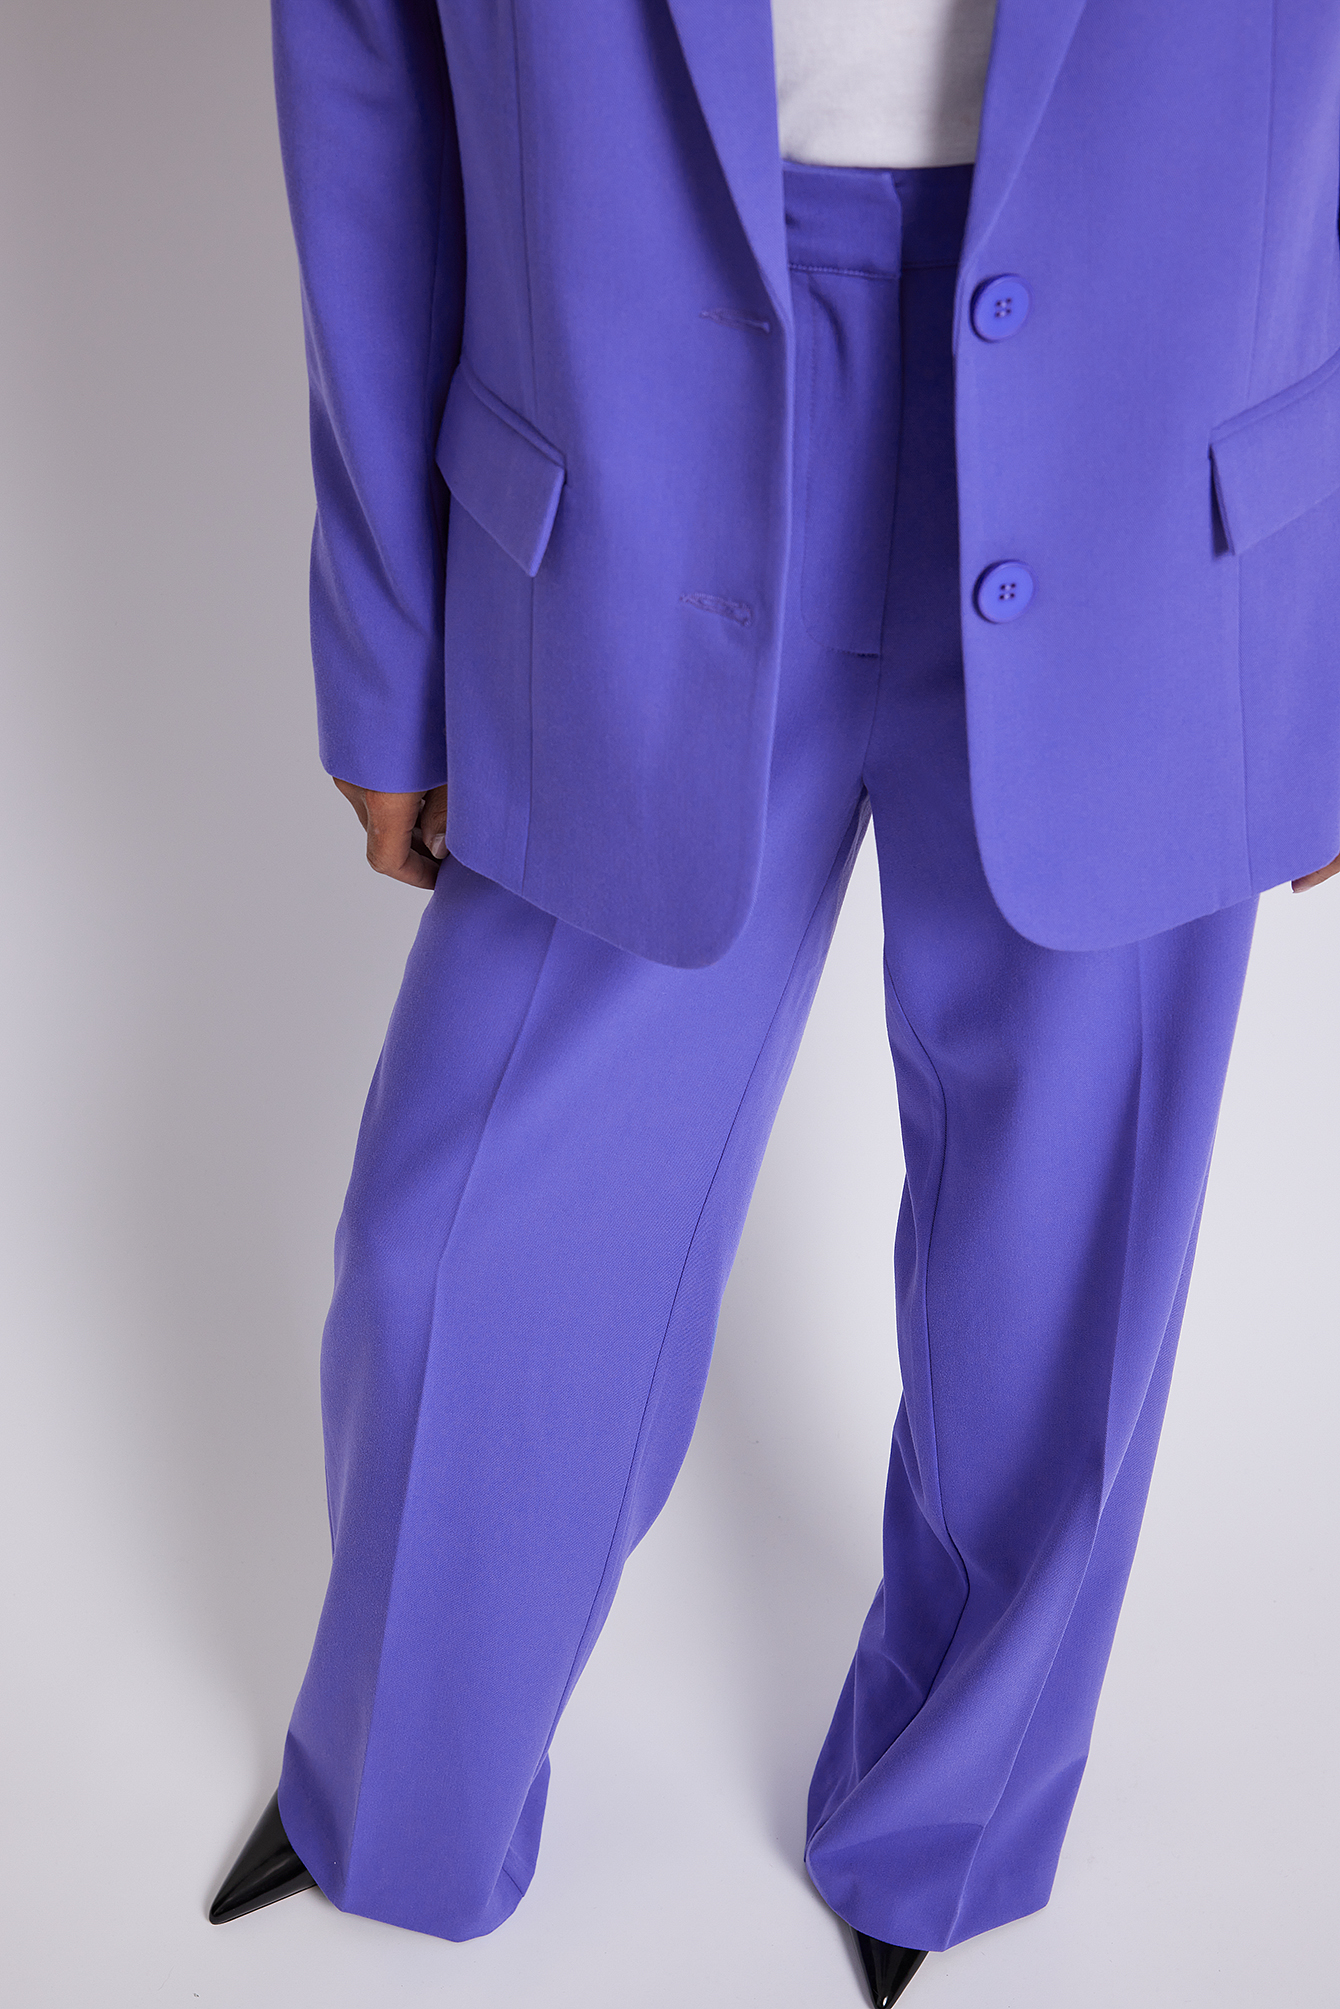 Hugo Boss Trouser Suits and Skirt Suits Purple India  Hugo Boss Sale  Online At Best Prices